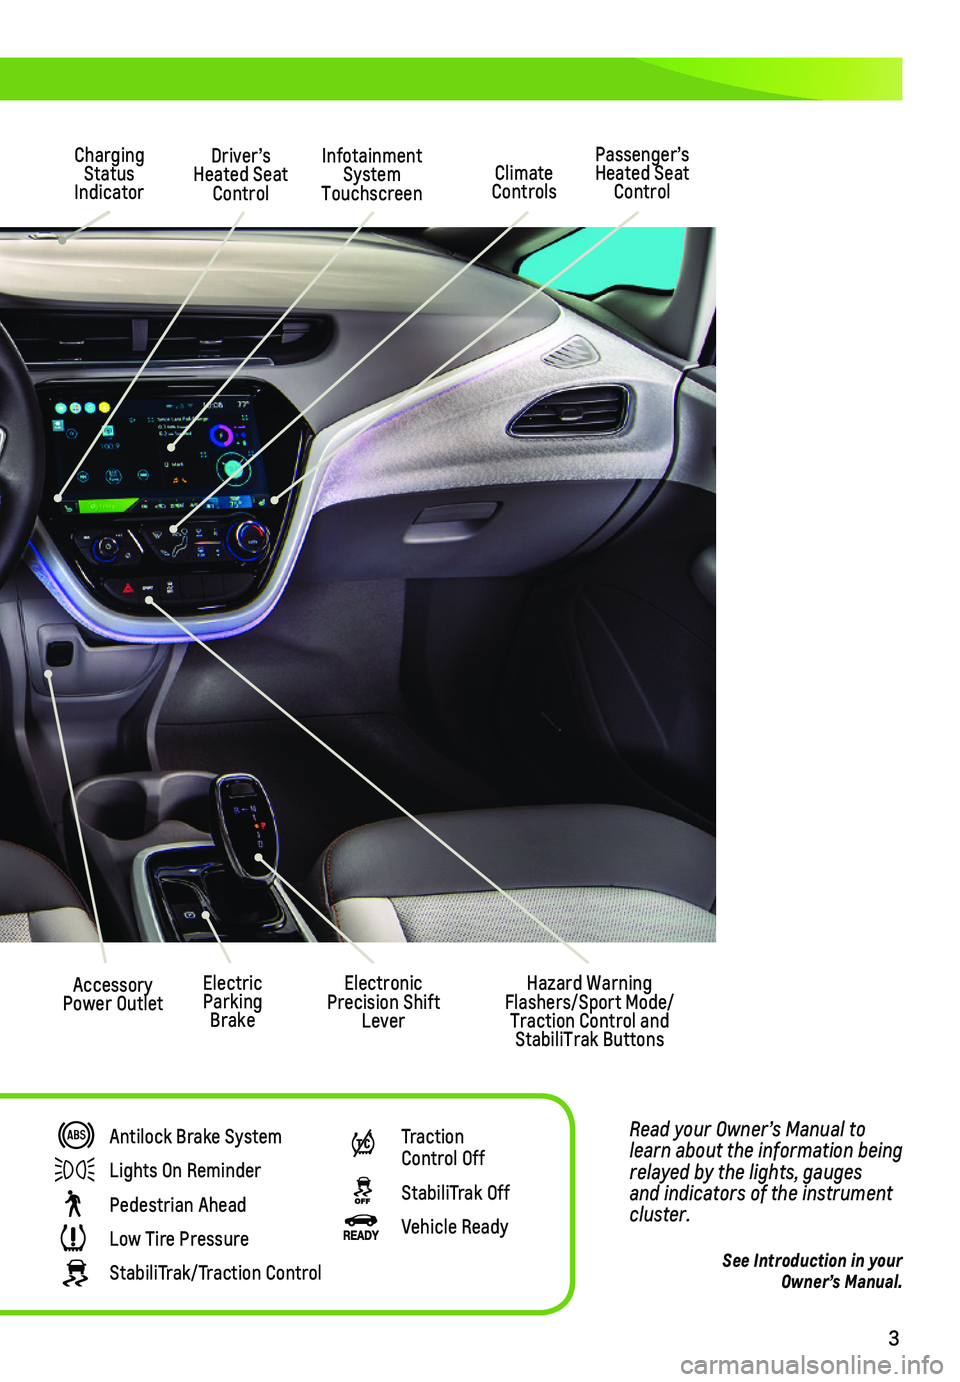 CHEVROLET BOLT EV 2021  Get To Know Guide 3
Read your Owner’s Manual to learn about the information being relayed by the lights, gauges and indicators of the instrument cluster.
See Introduction in your  Owner’s Manual.
Driver’s Heated 